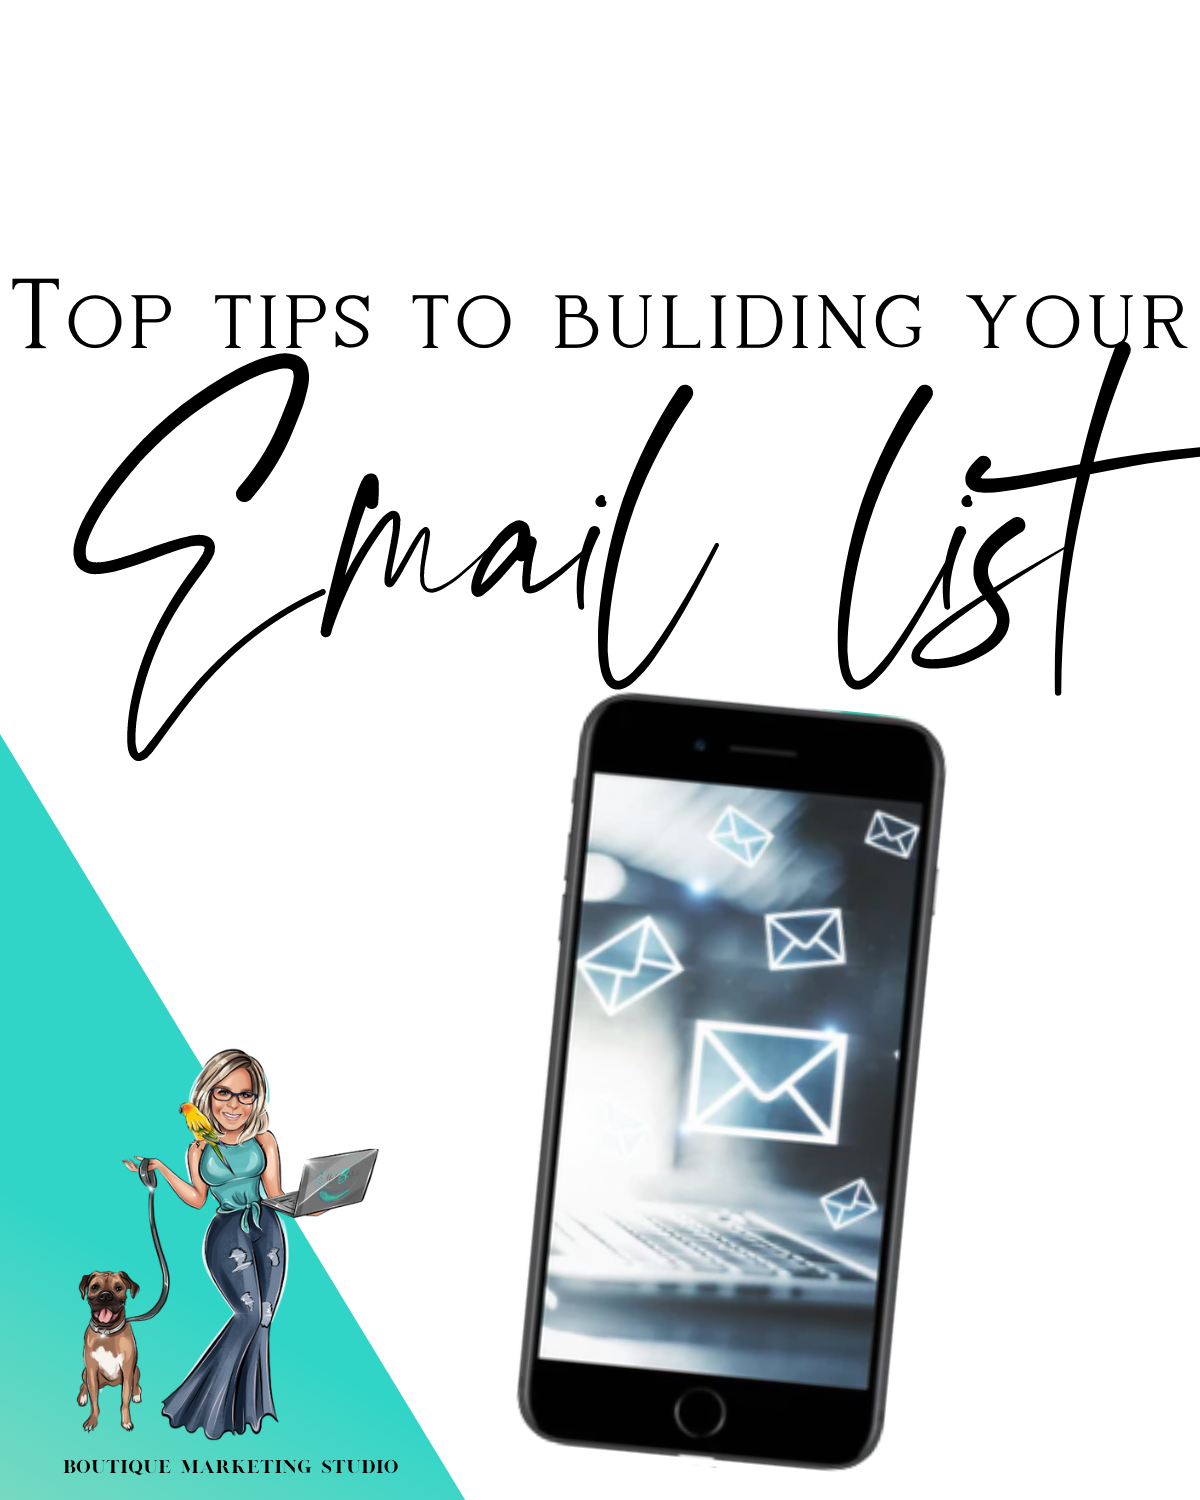 My Top Tips for building your Email List!